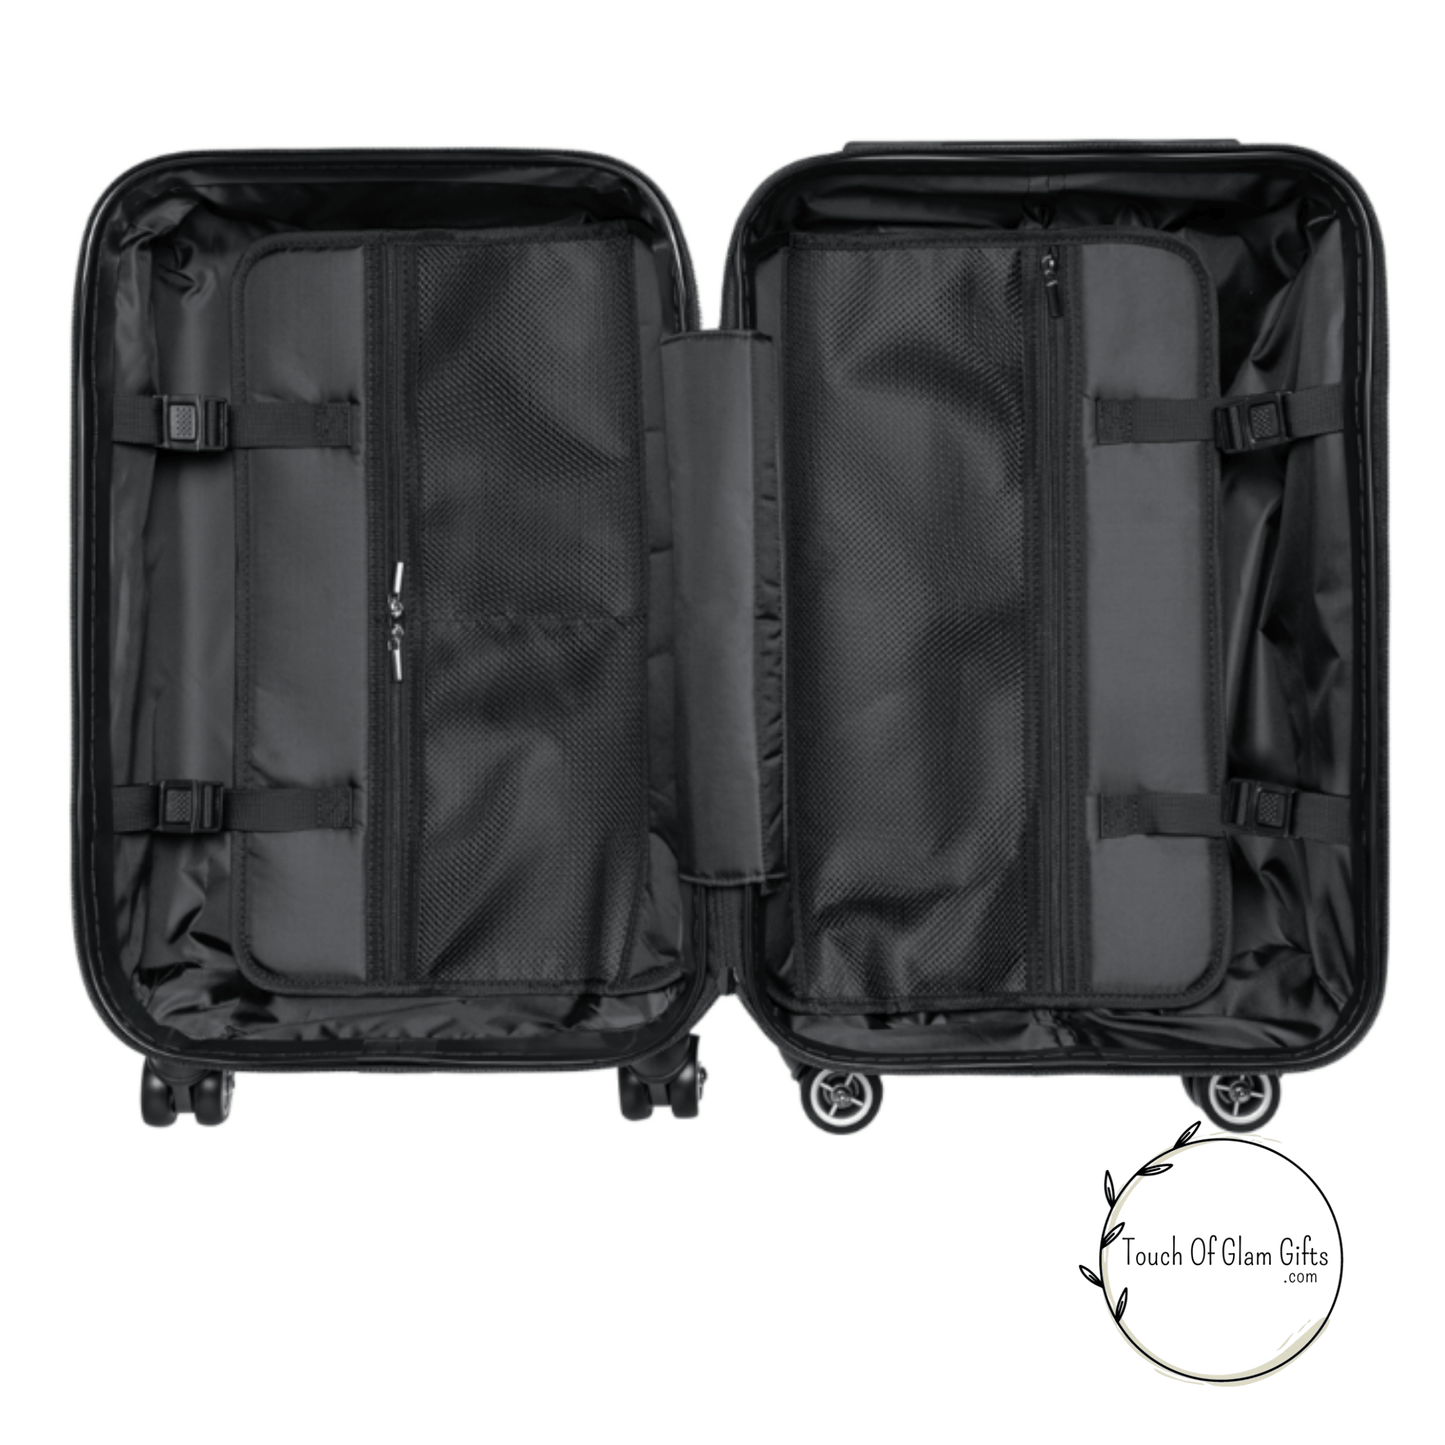 The inside our our suitcase has dividers with pockets for extra storage and both dividers clip to hold your personal belongings when closing the suitcase.